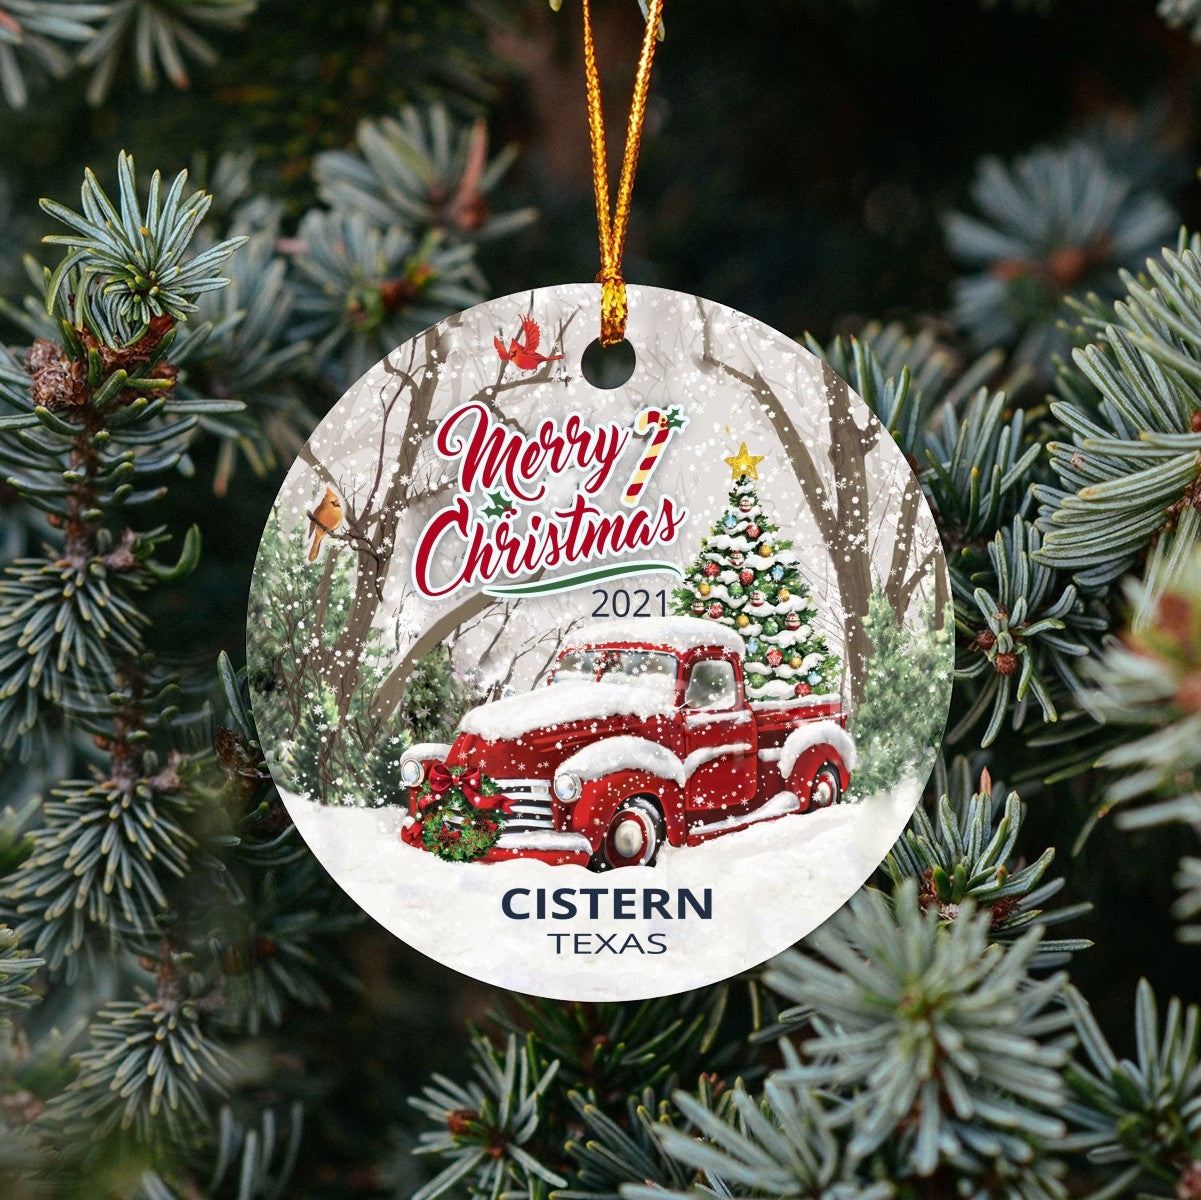 Christmas Tree Ornaments Cistern - Ornament With Name City, State Cistern Texas TX Ornament - Red Truck Xmas Ornaments 3'' Plastic Gift For Family, Friend And Housewarming